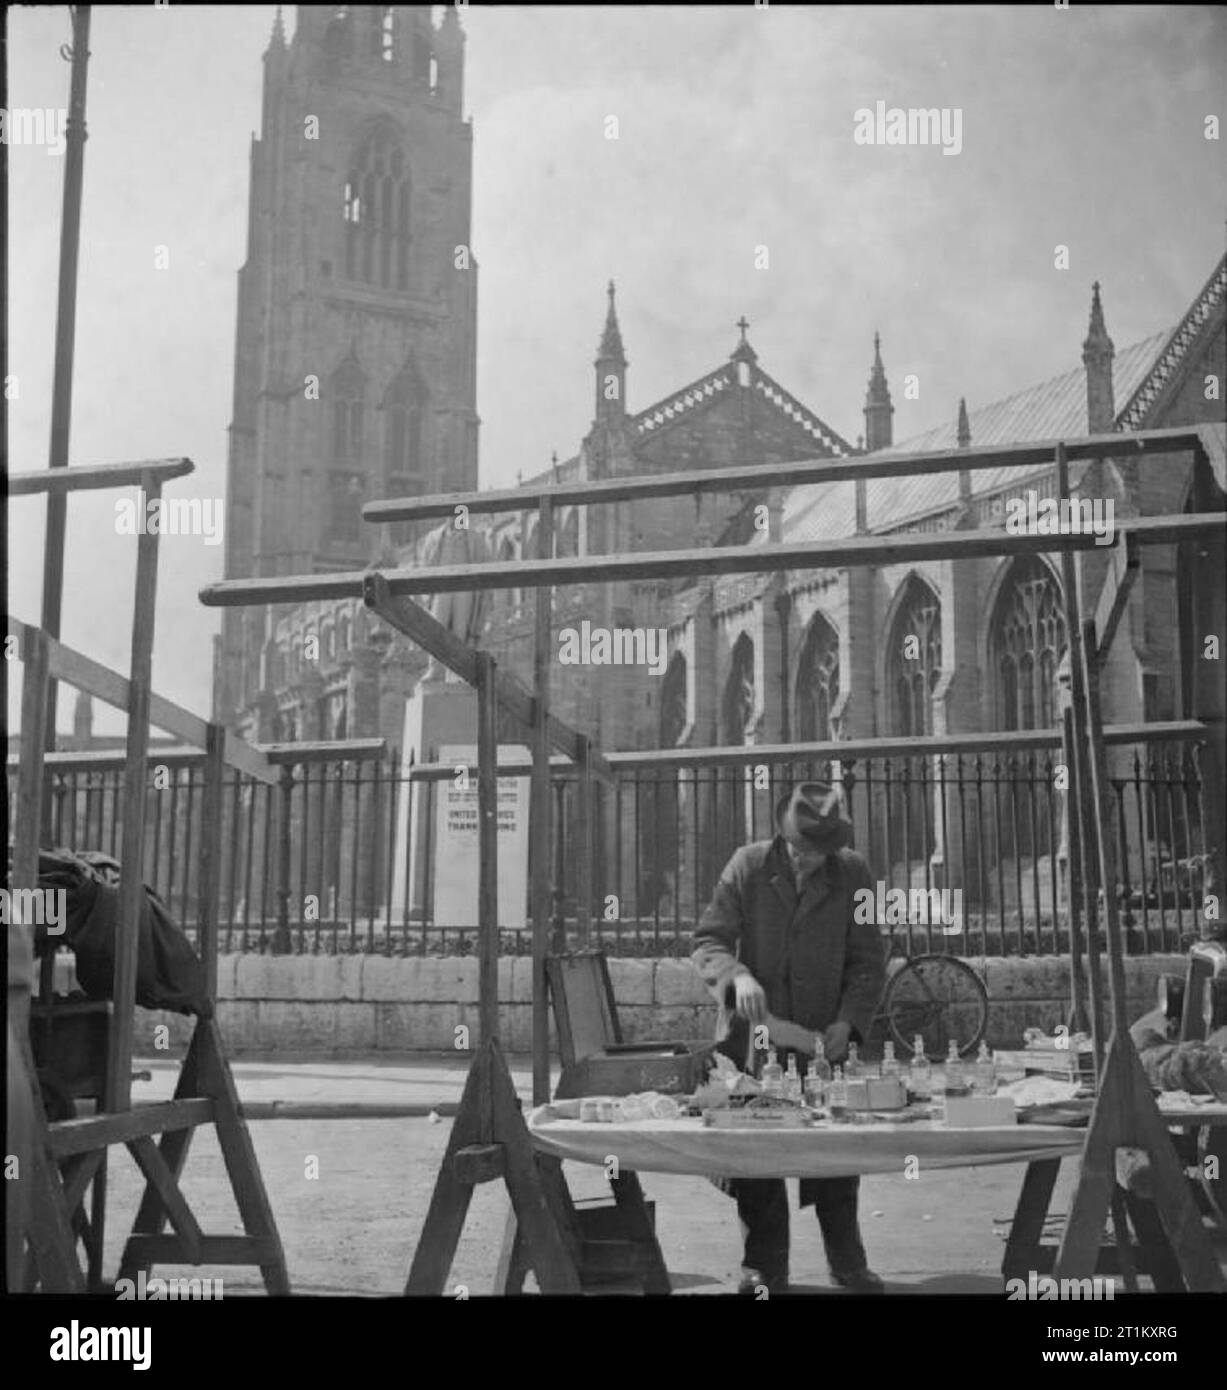 Boston Market- the Country Market and May Fair, Boston, Lincolnshire, England, UK, 1945 A man selling medicines arranges his wares on his stall in the marketplace at Boston, Lincolnshire. Directly behind him can be clearly seen 'Boston Stump', St Botolph's Church. On the church railings, a poster advertising a 'united service of thanksgiving' celebrating the 'cessation of hostilities' is just visible. Stock Photo